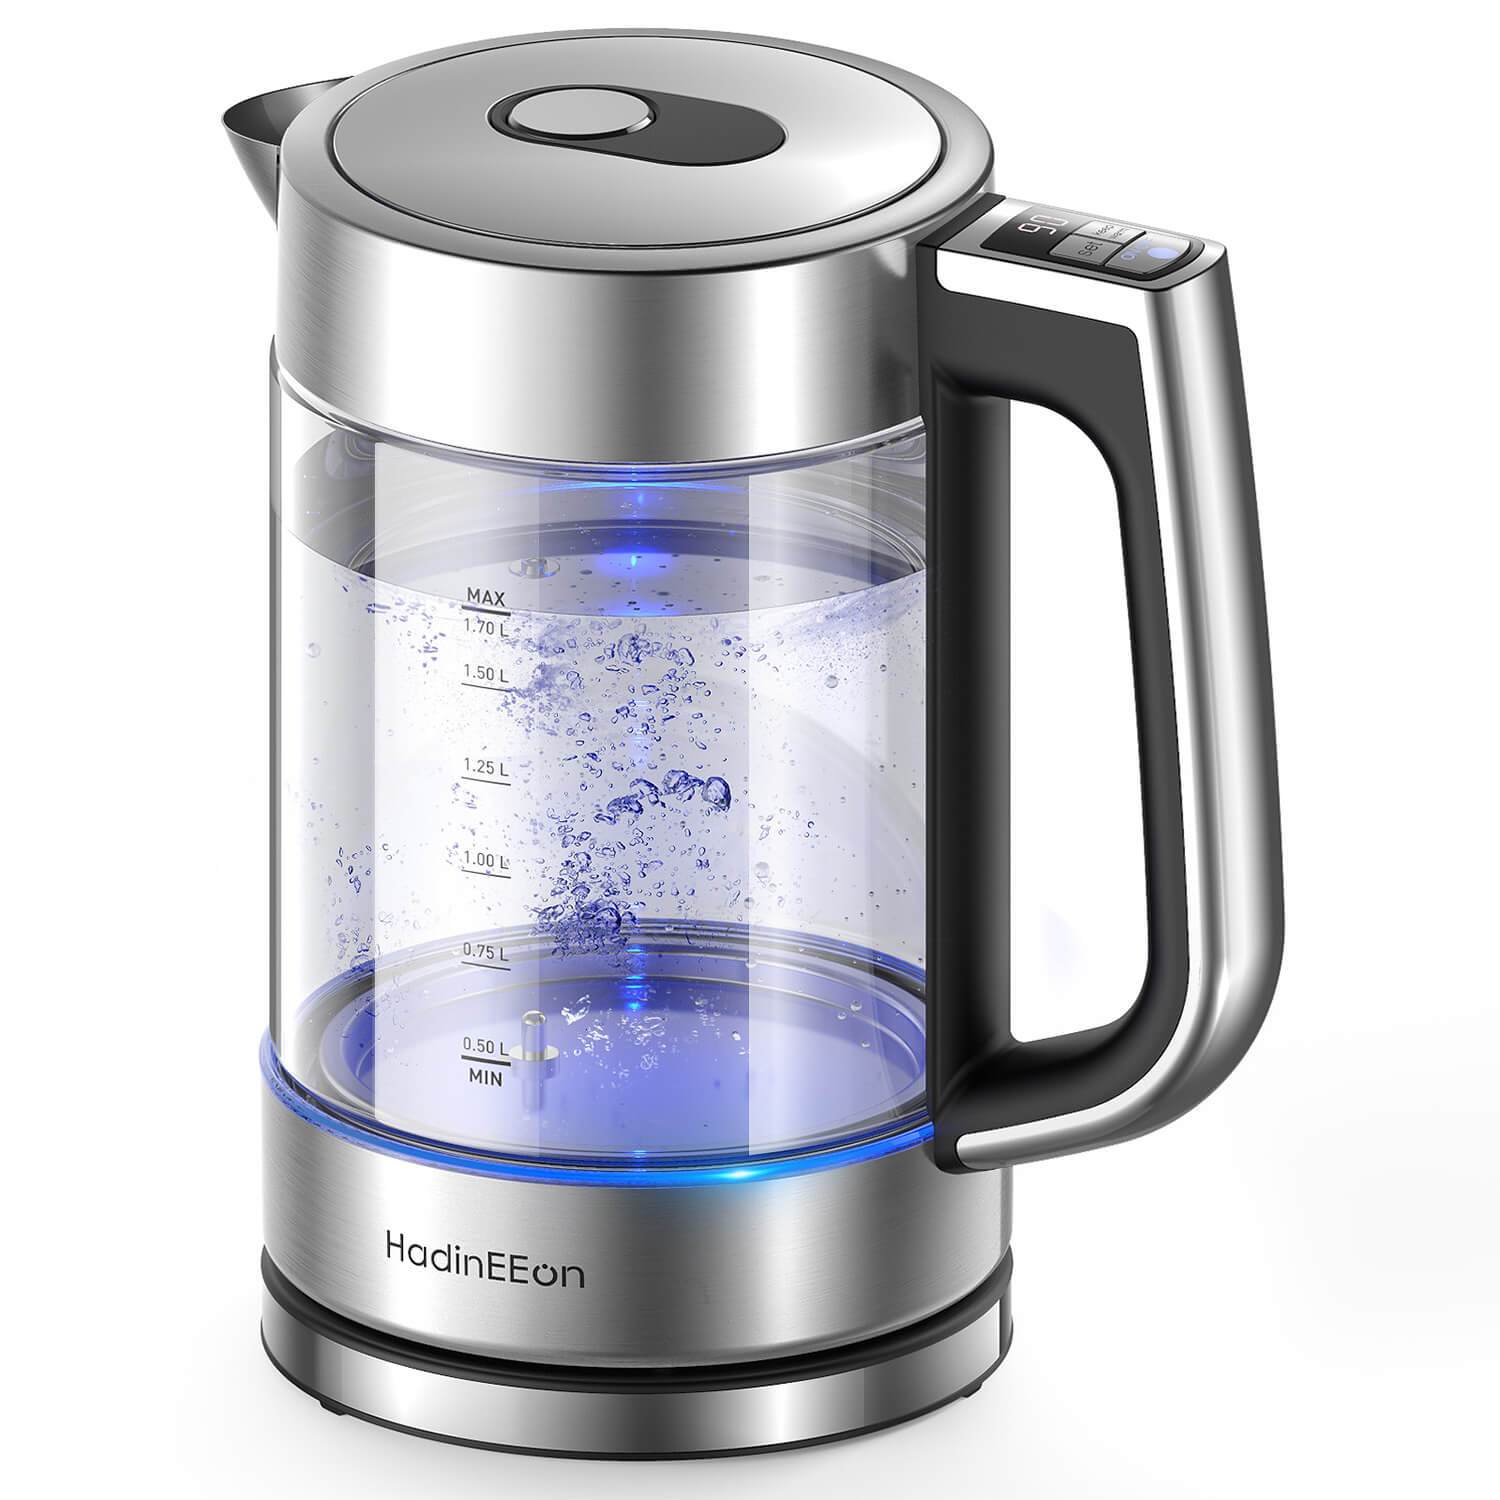 HadinEEon Variable Temperature Electric Kettle 1500W Electric Tea Kett Featured Image